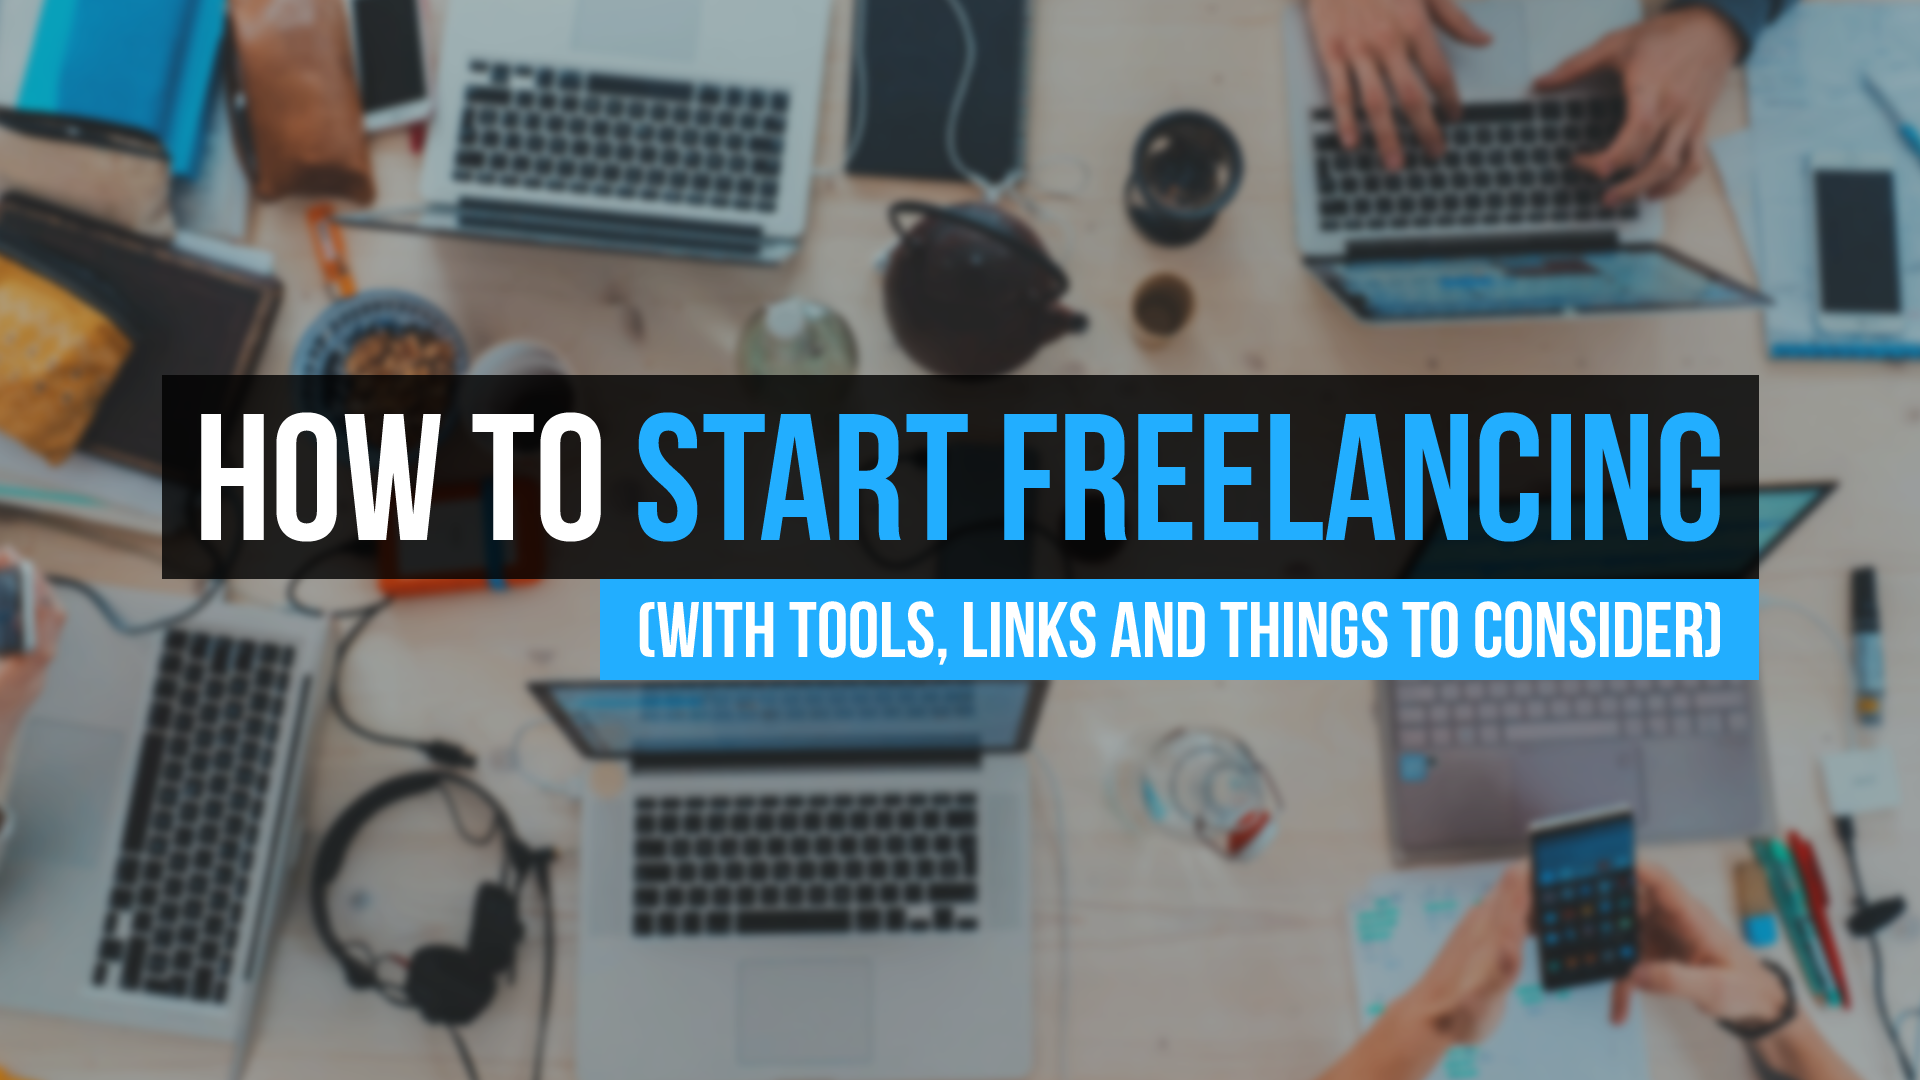 How To Start Freelancing (With Tools, Links, and Things to Consider)